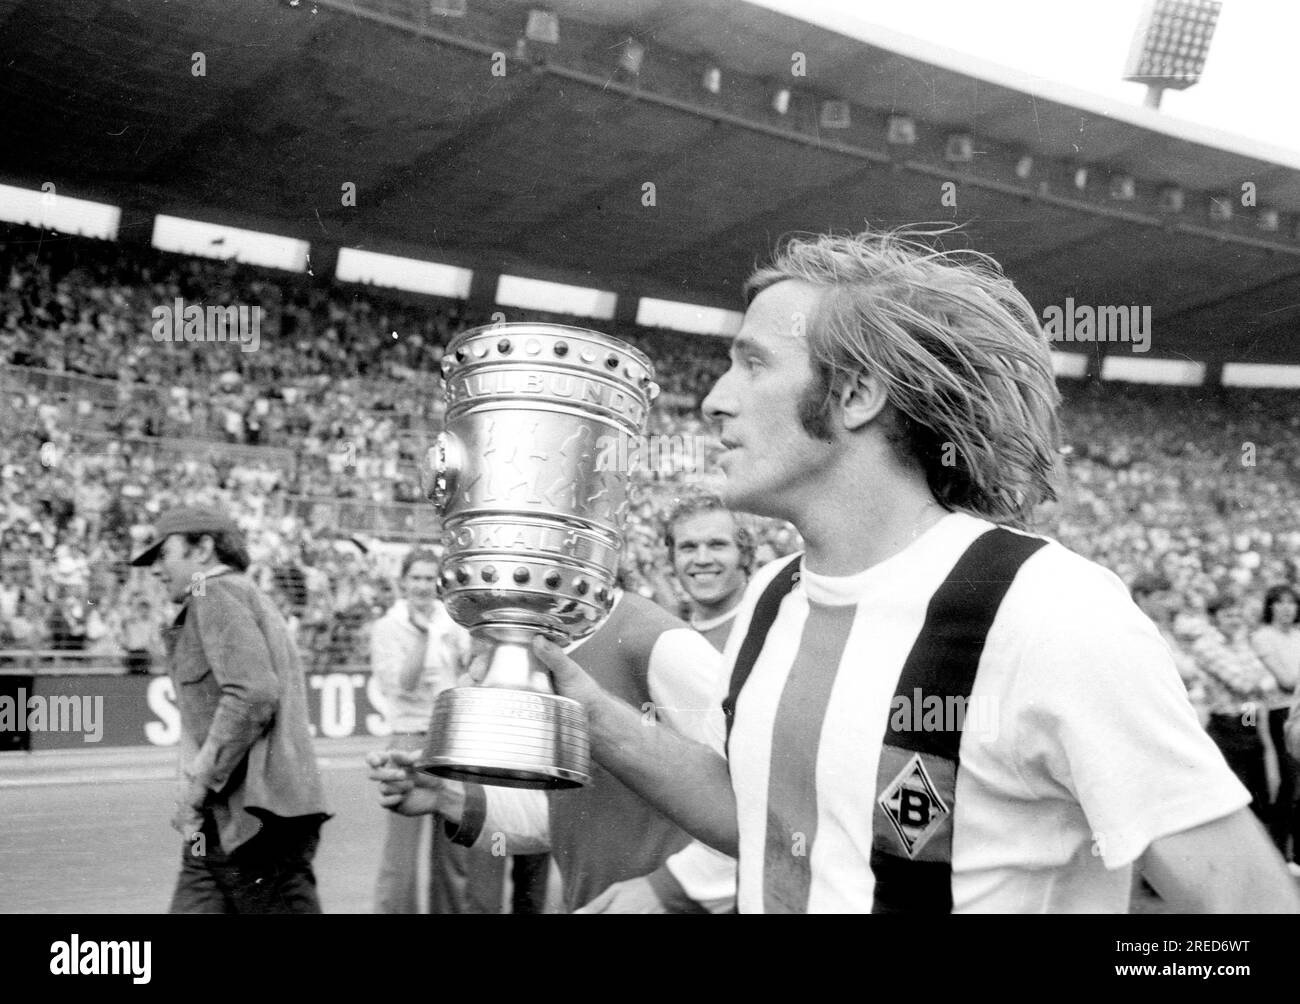 DFB Cup Final 1973: Borussia Mönchengladbach - 1. FC Köln 2:1 / Guenter Netzer (Borussia) with the DFB Cup on the lap of honor , behind Horst Sieloff (Borussia) [automated translation] Stock Photo